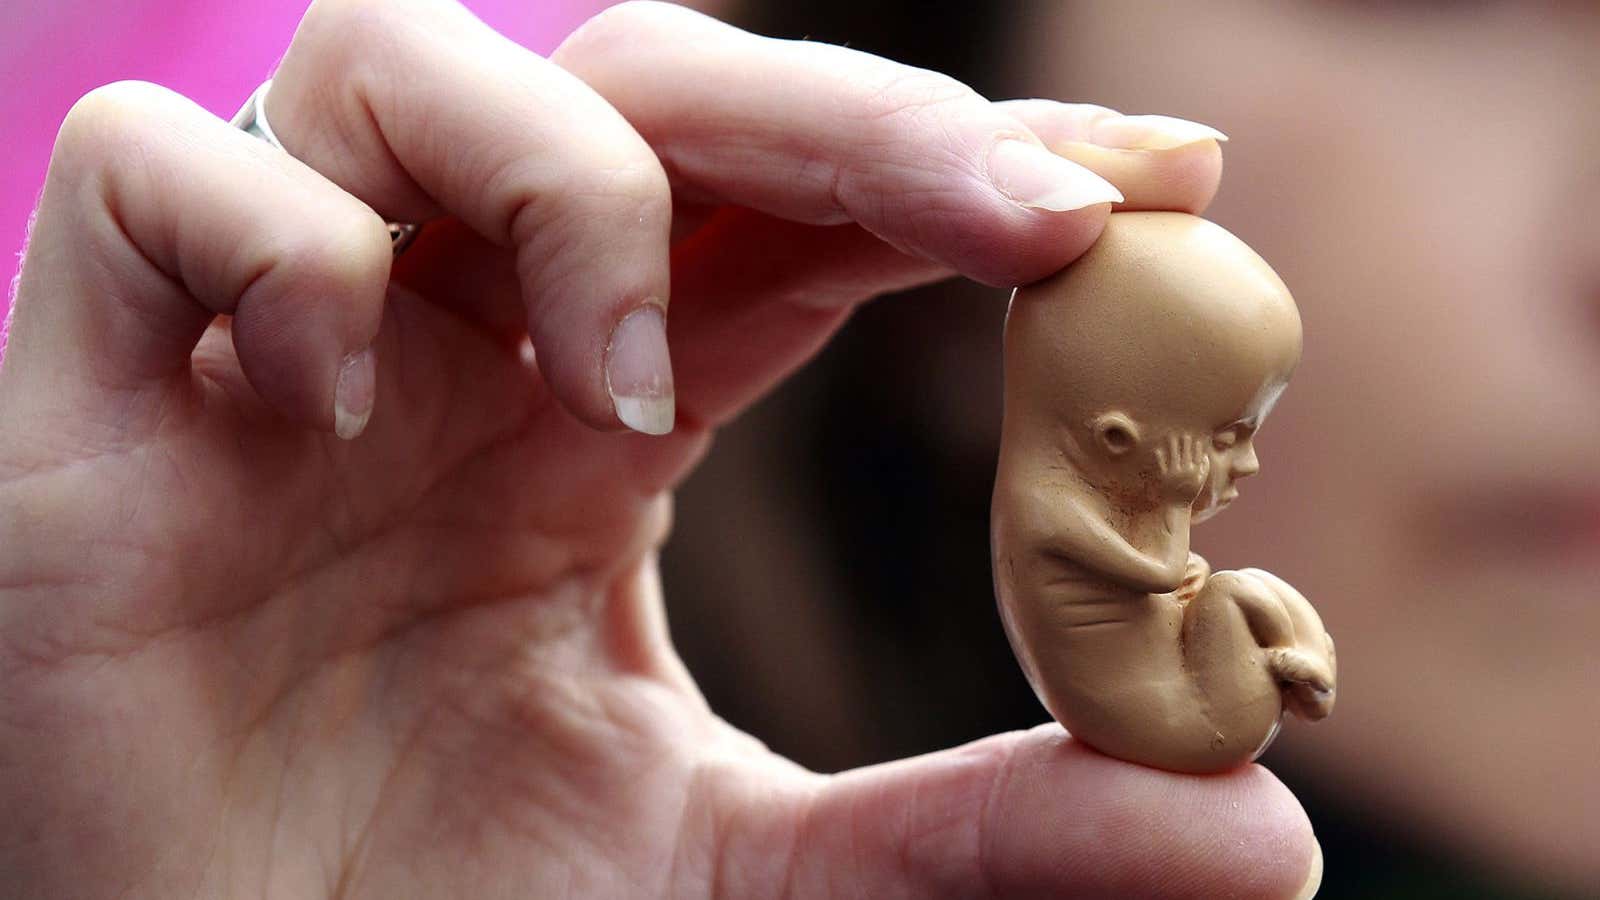 There could be many benefits to genetically modifying human embryos.